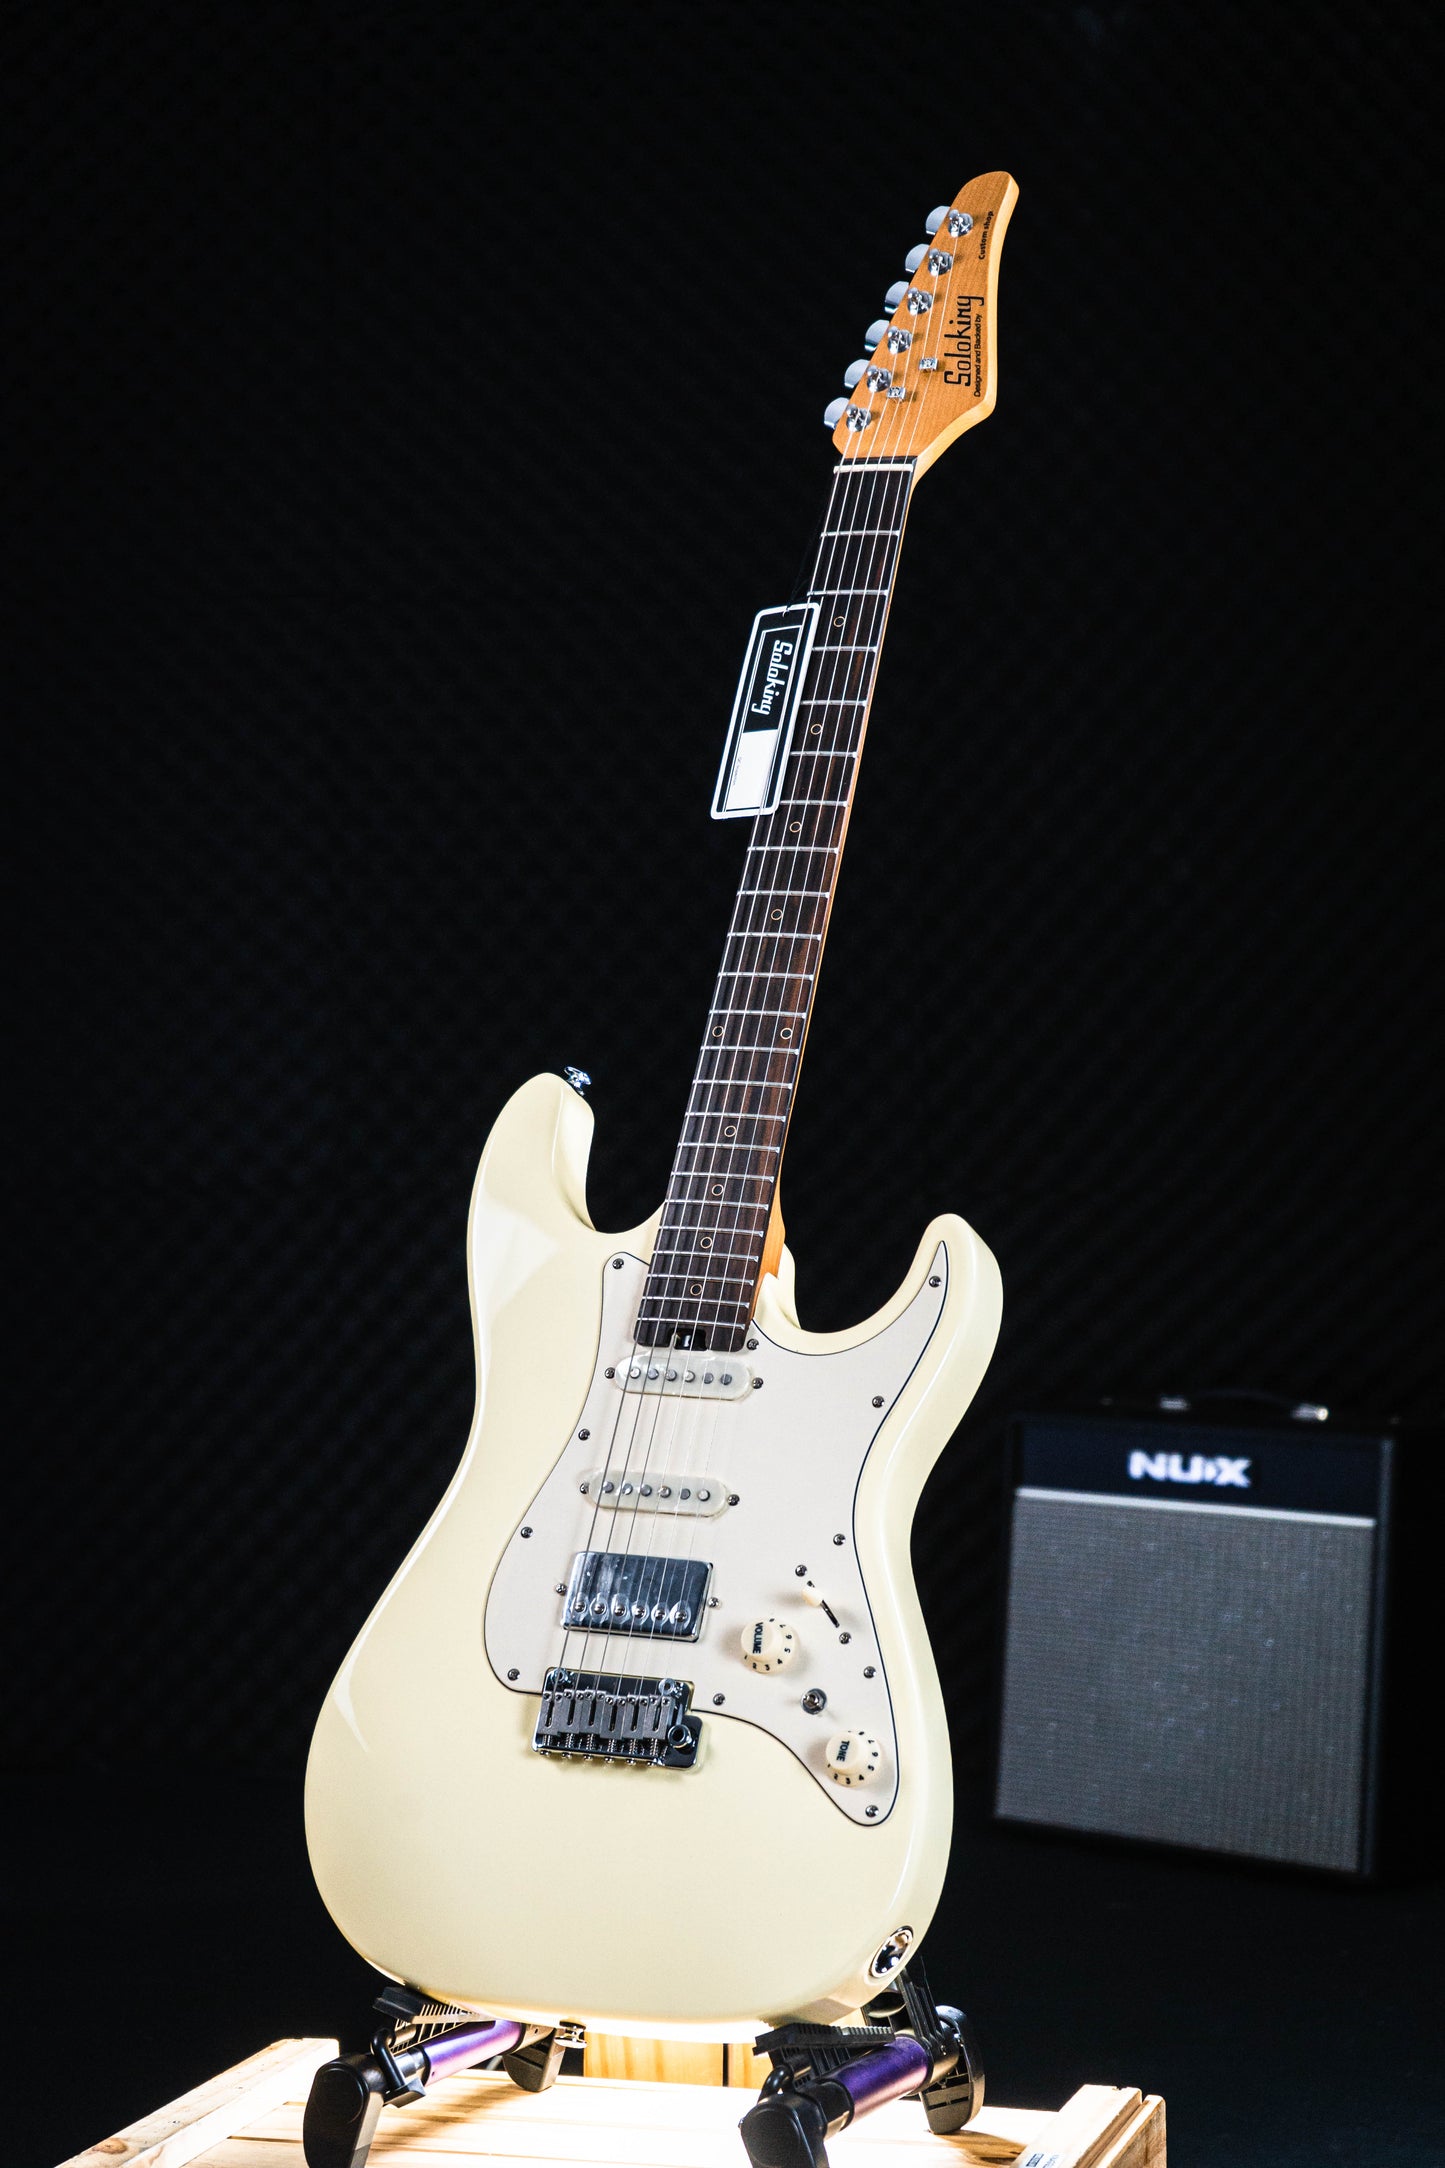 Soloking MS-11 Classic MKII with rosewood FB in Vintage White